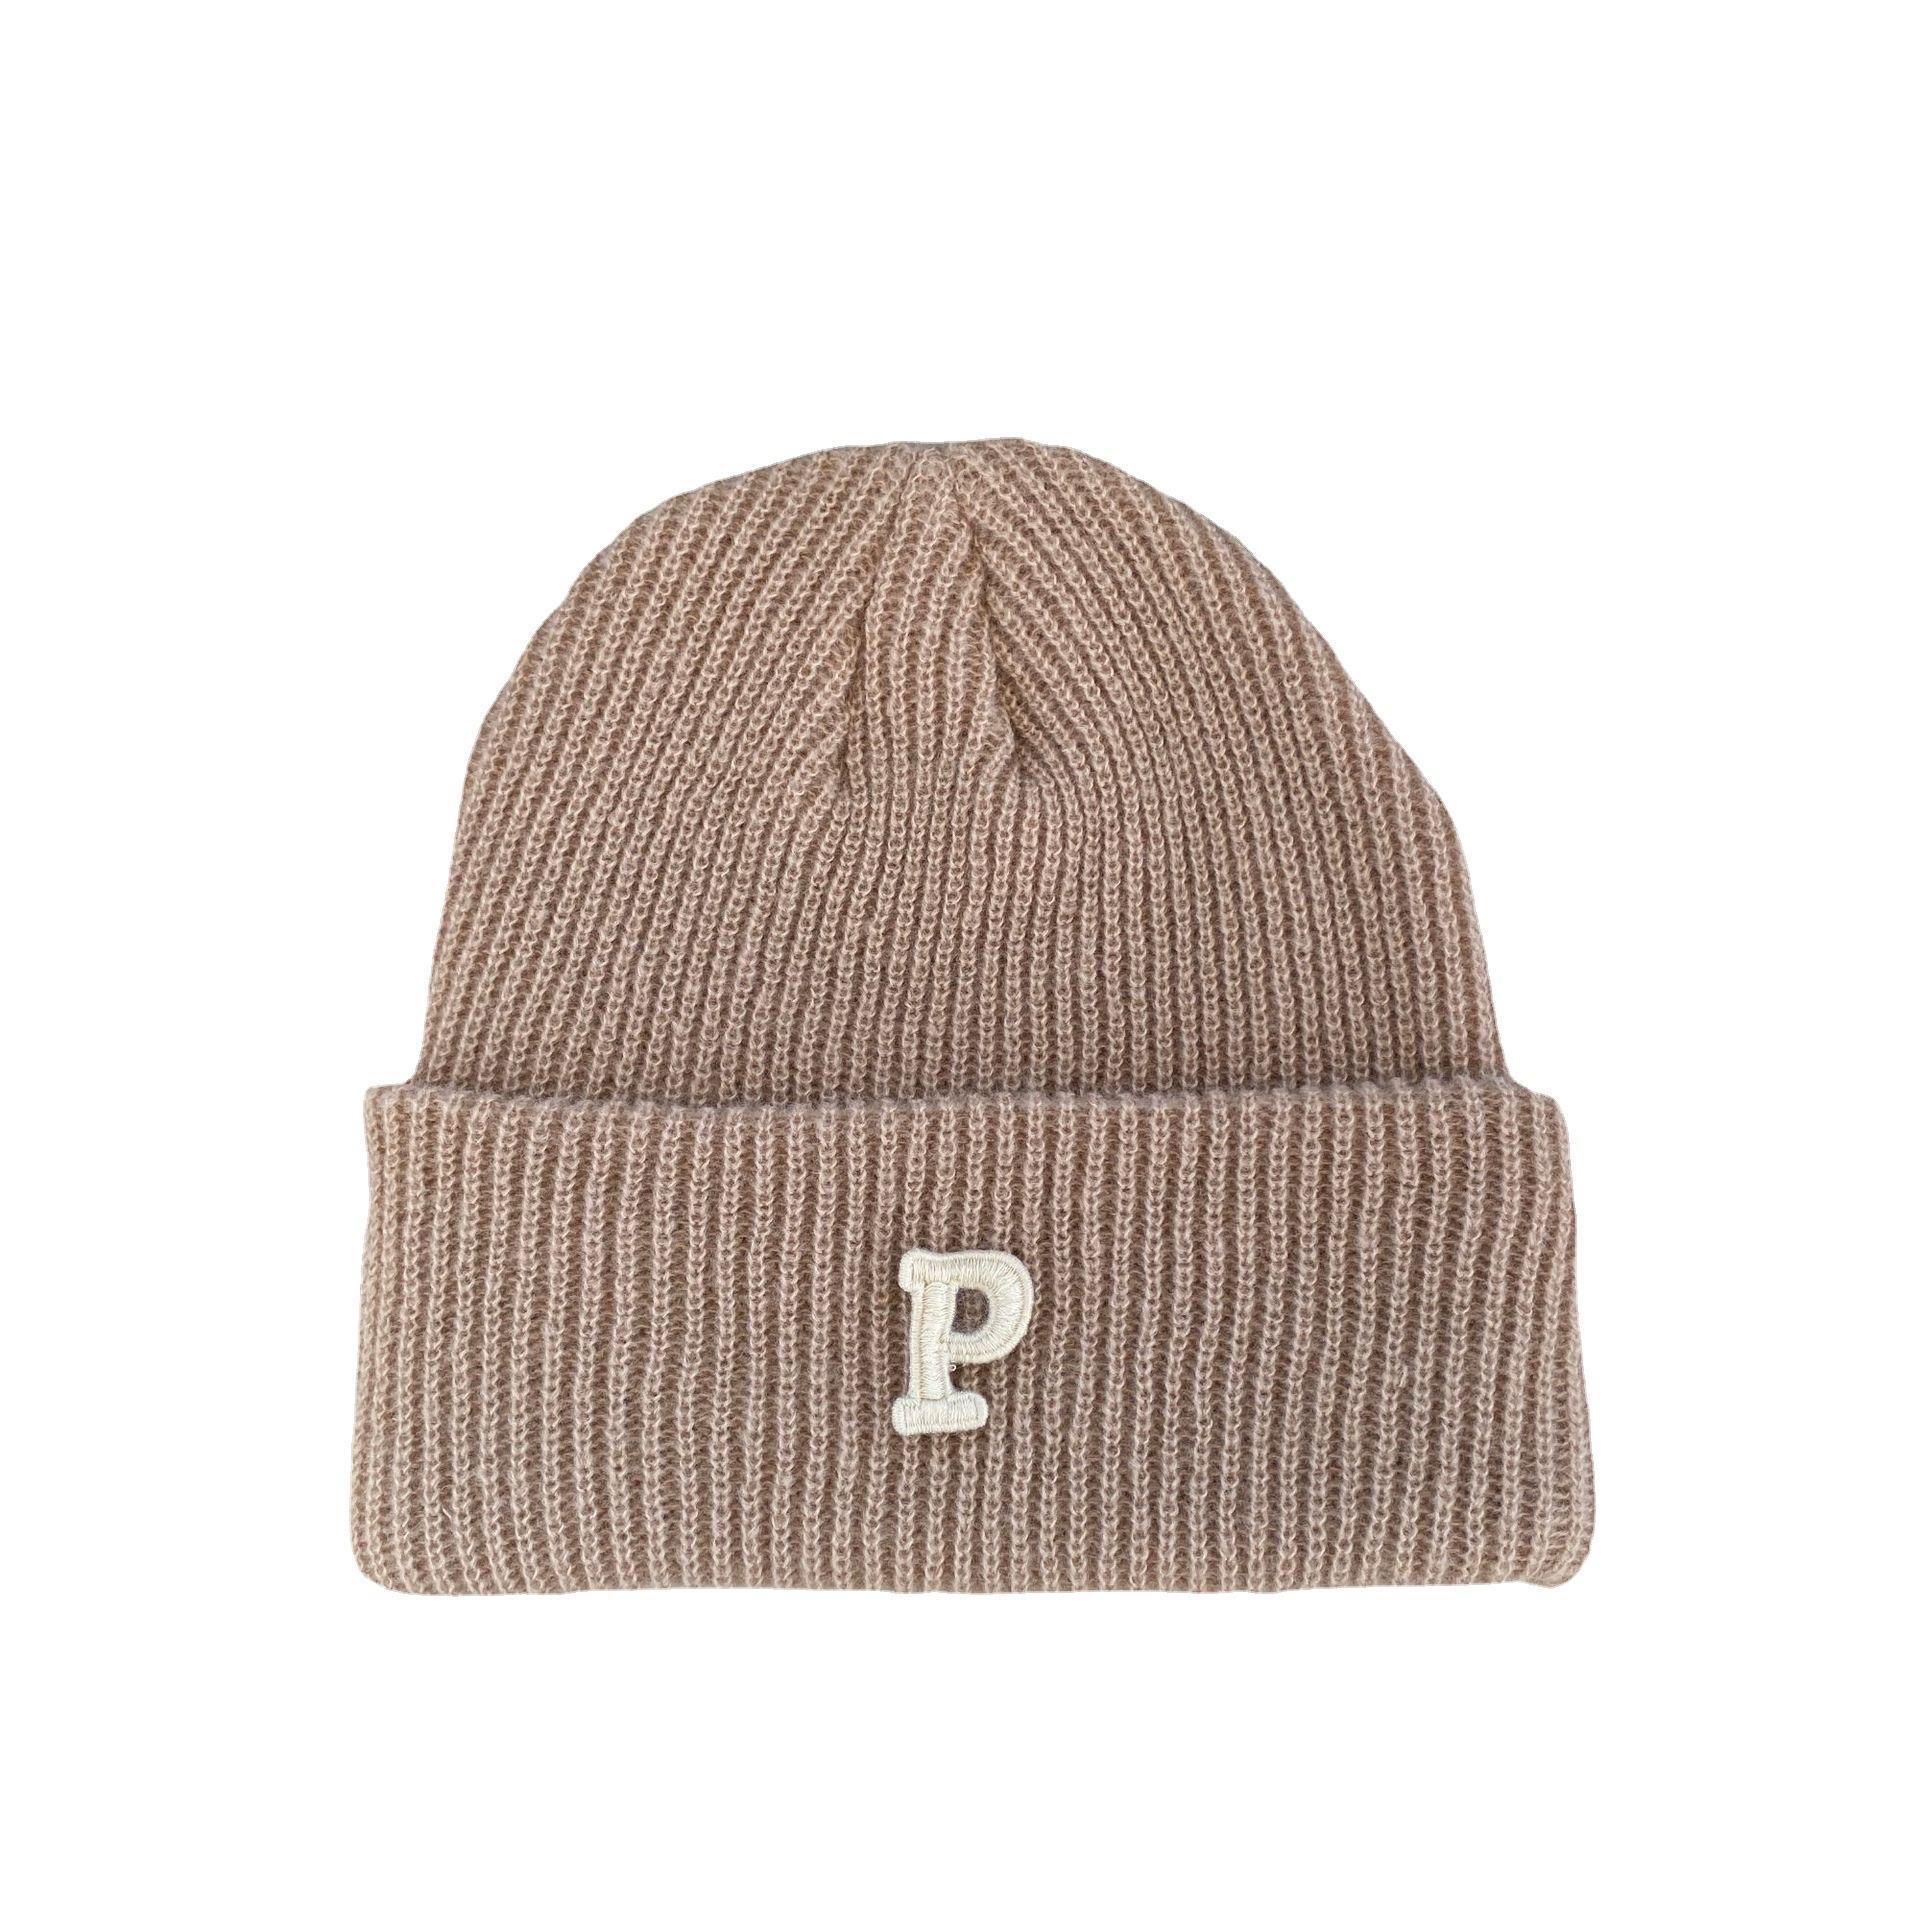 Autumn and Winter P Letter Wool Knitted Hat Women's Korean Ins Fashion Fashionable Warm All-Matching Student Sweet Cool Style Beanie Hat